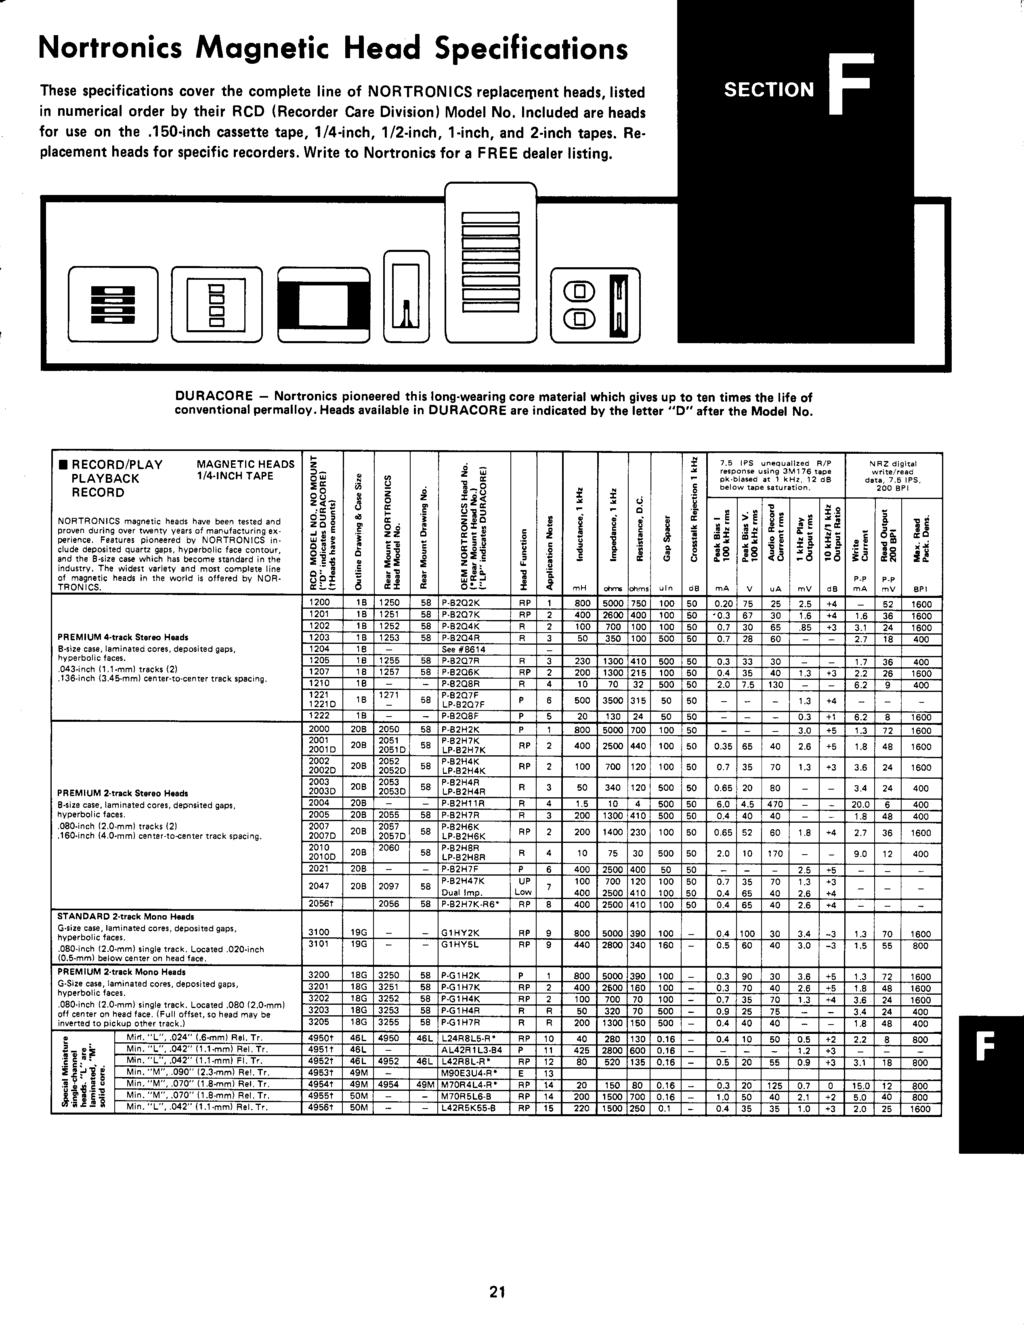 Nortronics Magnetic Head Specifications These specifications cover the complete line of NORTRONCS replacement heads, listed in numerical order by their RCD (Recorder Care Division) Model No.